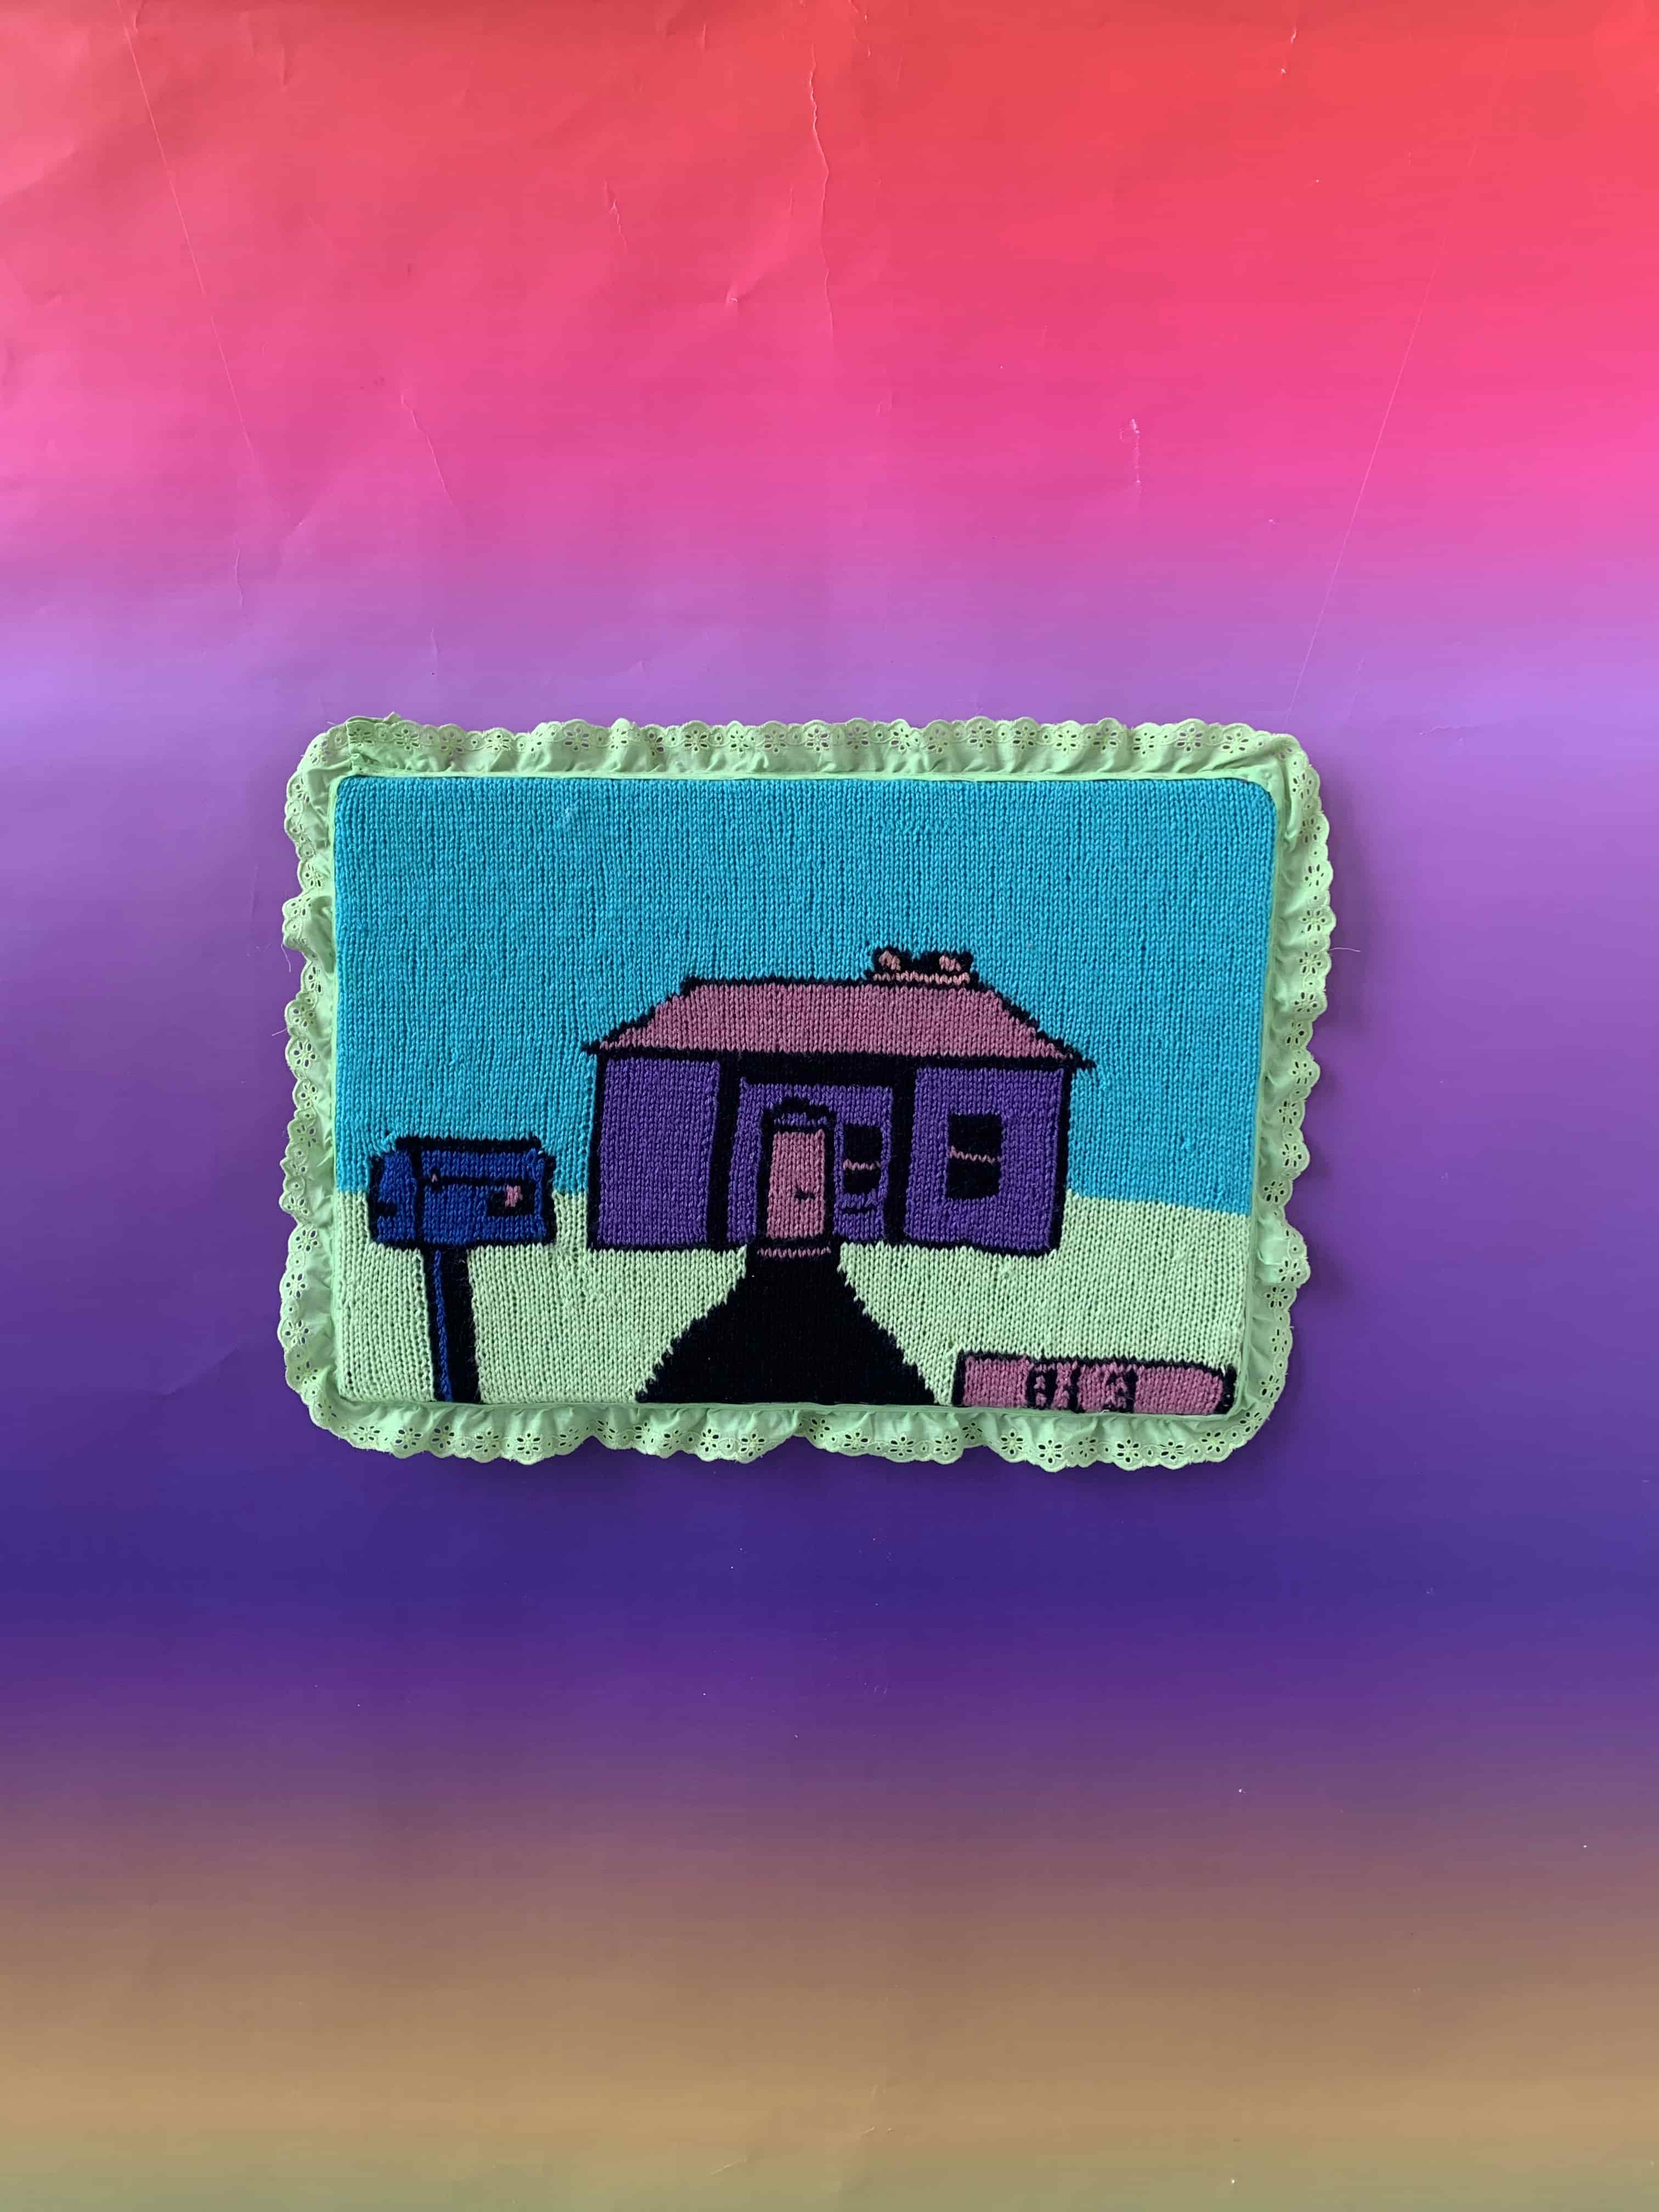 A knitted tapestry surrounded by green ribbon. It depicts a small pink and purple house with a purple letterbox.